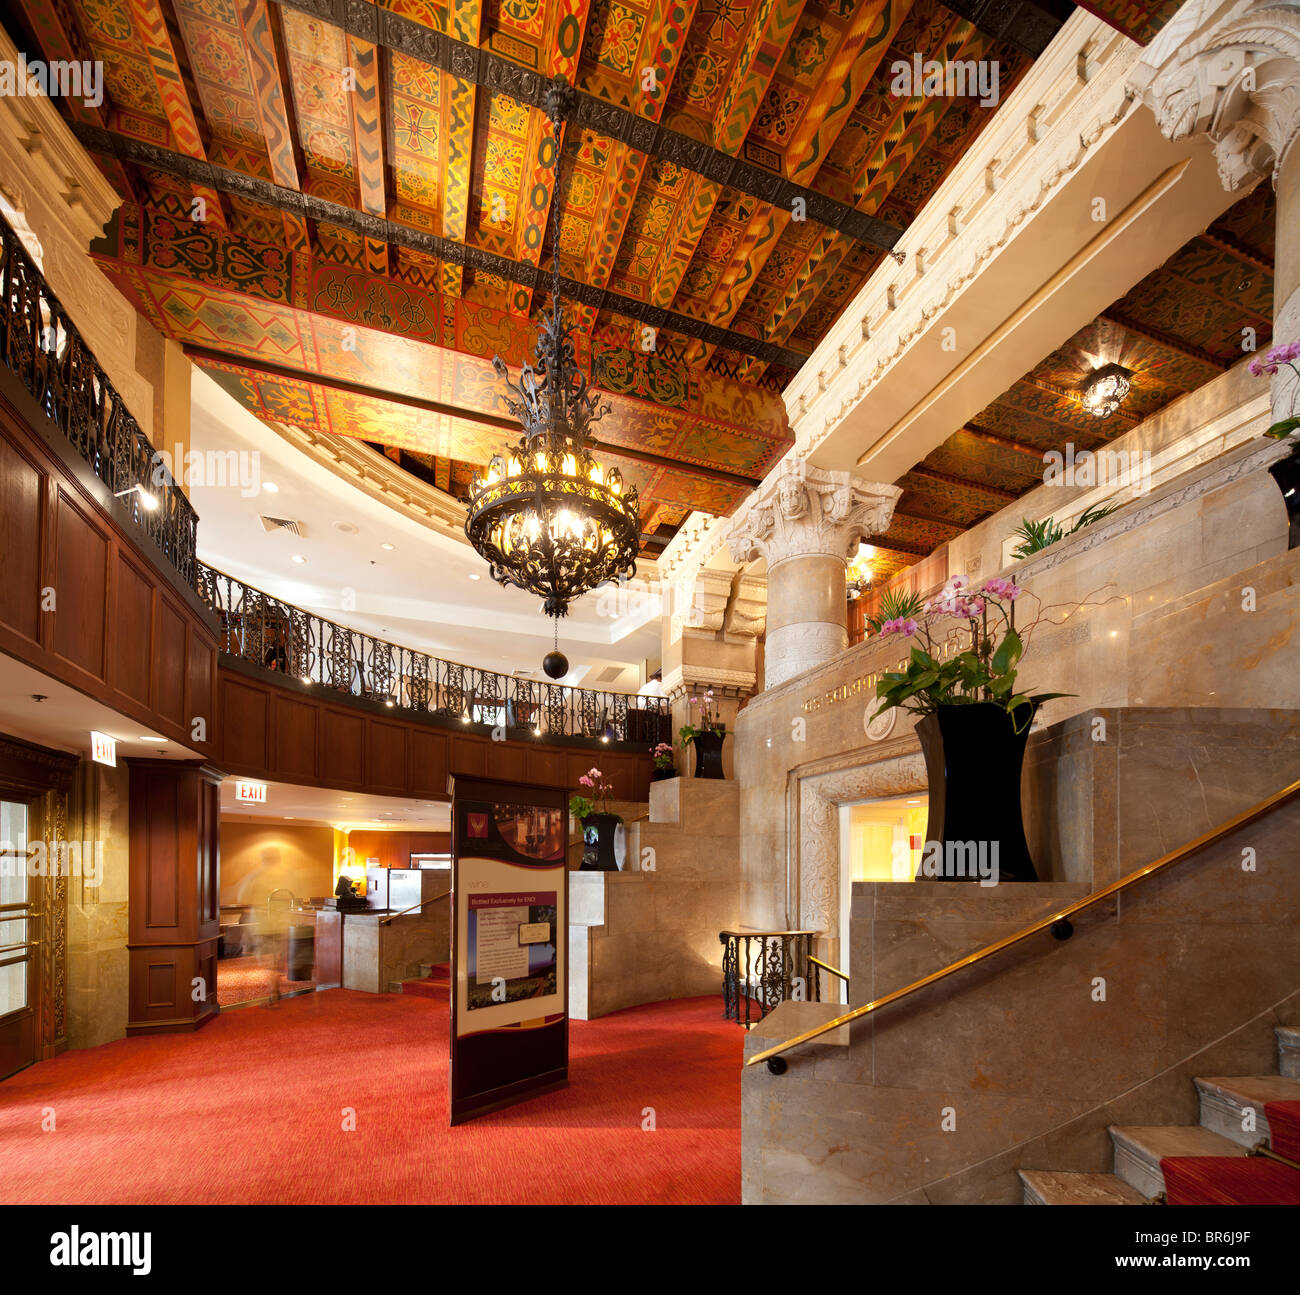 lobby of the Intercontinental Hotel, formerly the Shriner's Medinah Athletic Club, Norrth Michigan Avenue, Chicago Stock Photo